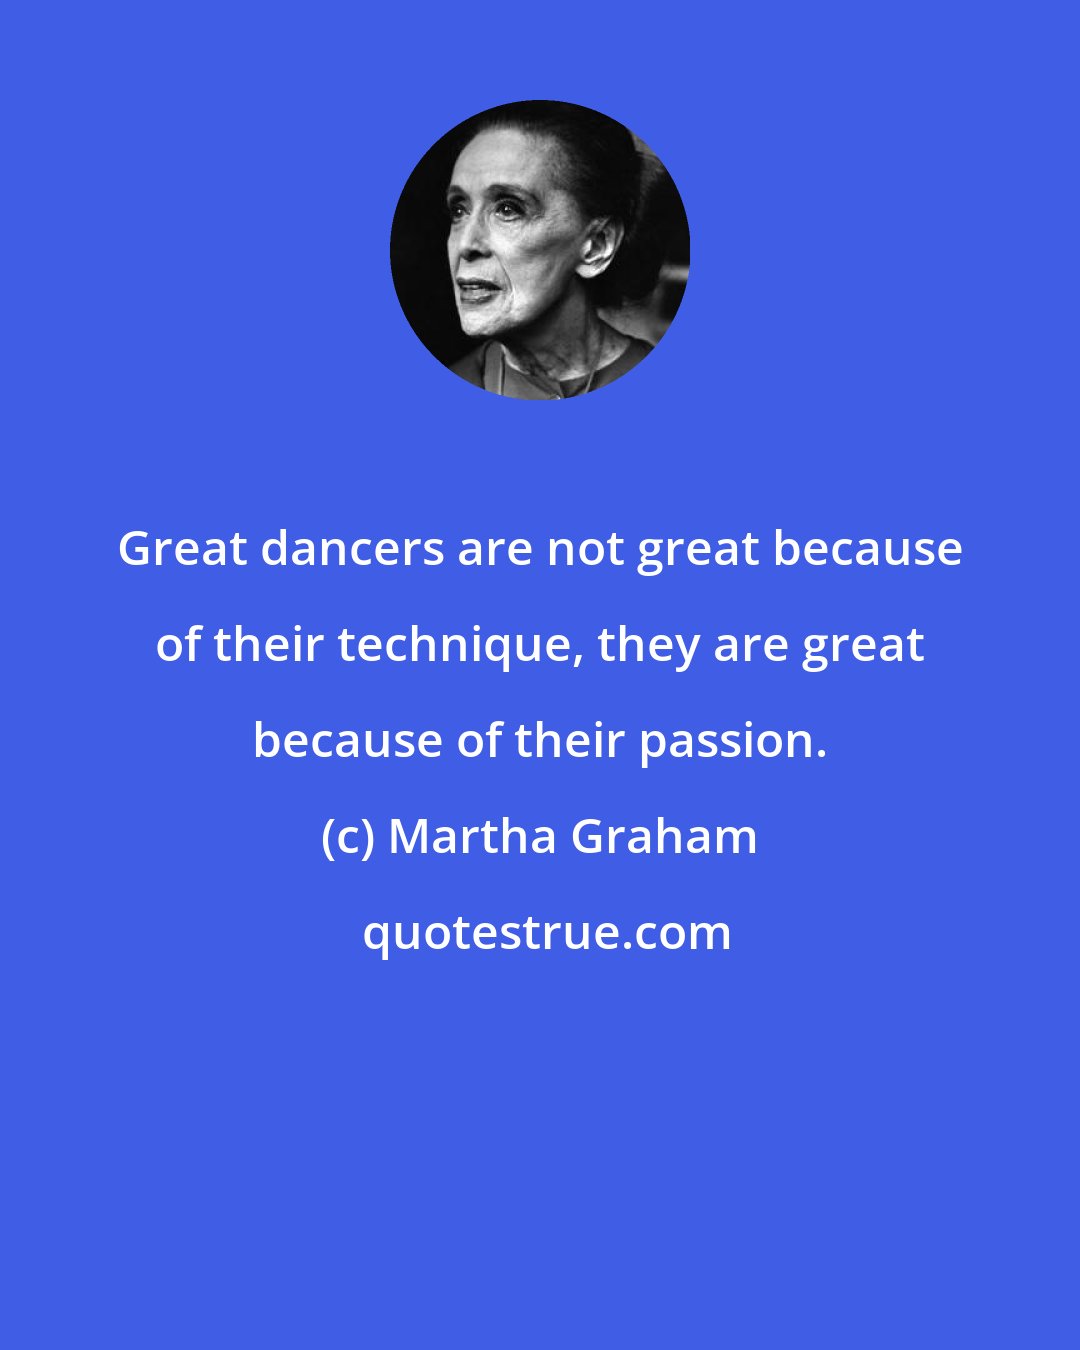 Martha Graham: Great dancers are not great because of their technique, they are great because of their passion.